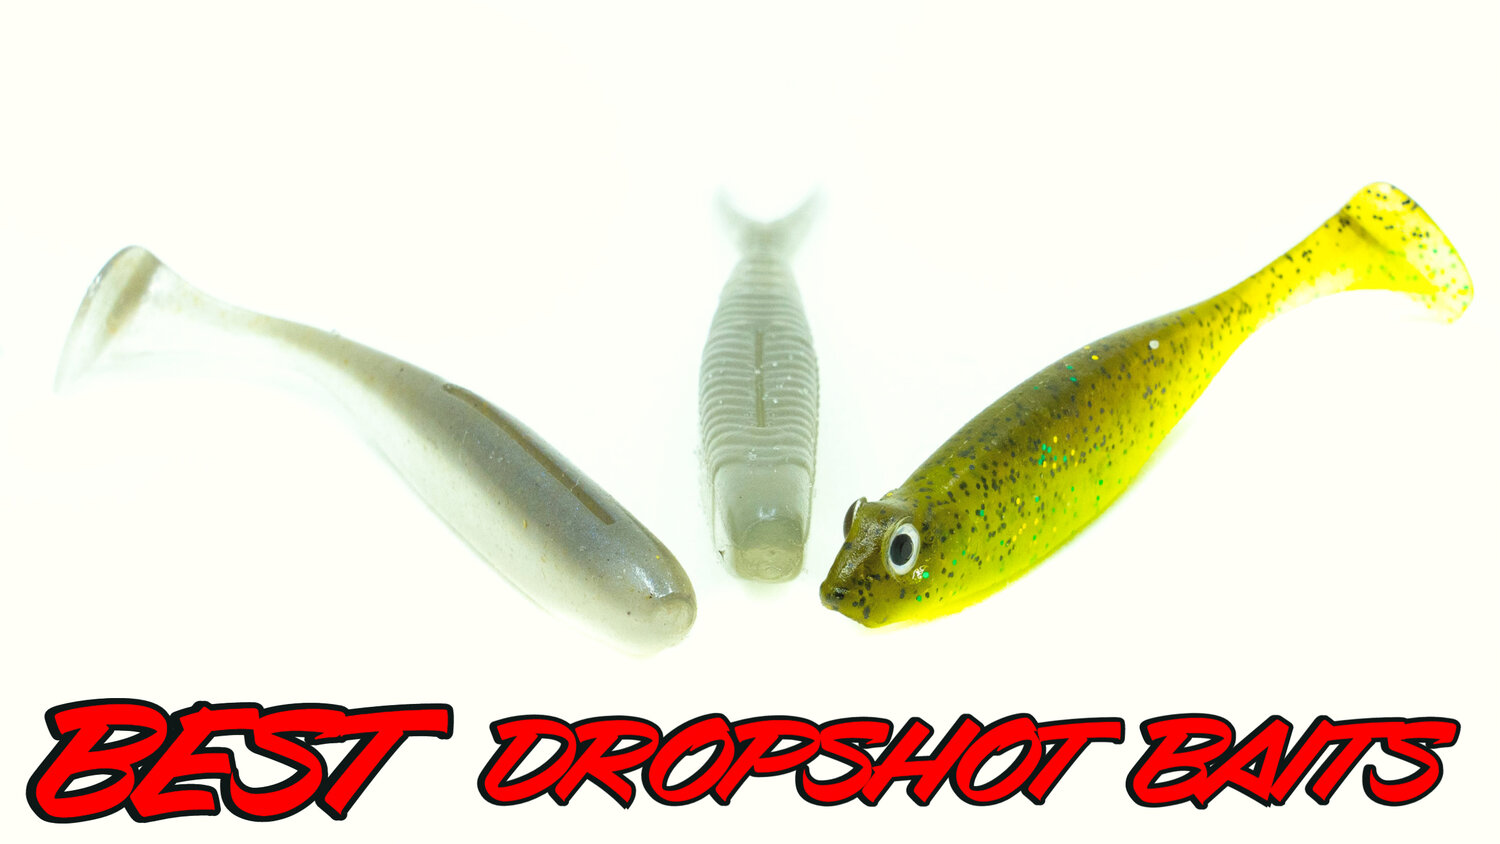 Underwater Dropshot Footage! Best Dropshot Worms For Bass Fishing! —  Tactical Bassin' - Bass Fishing Blog